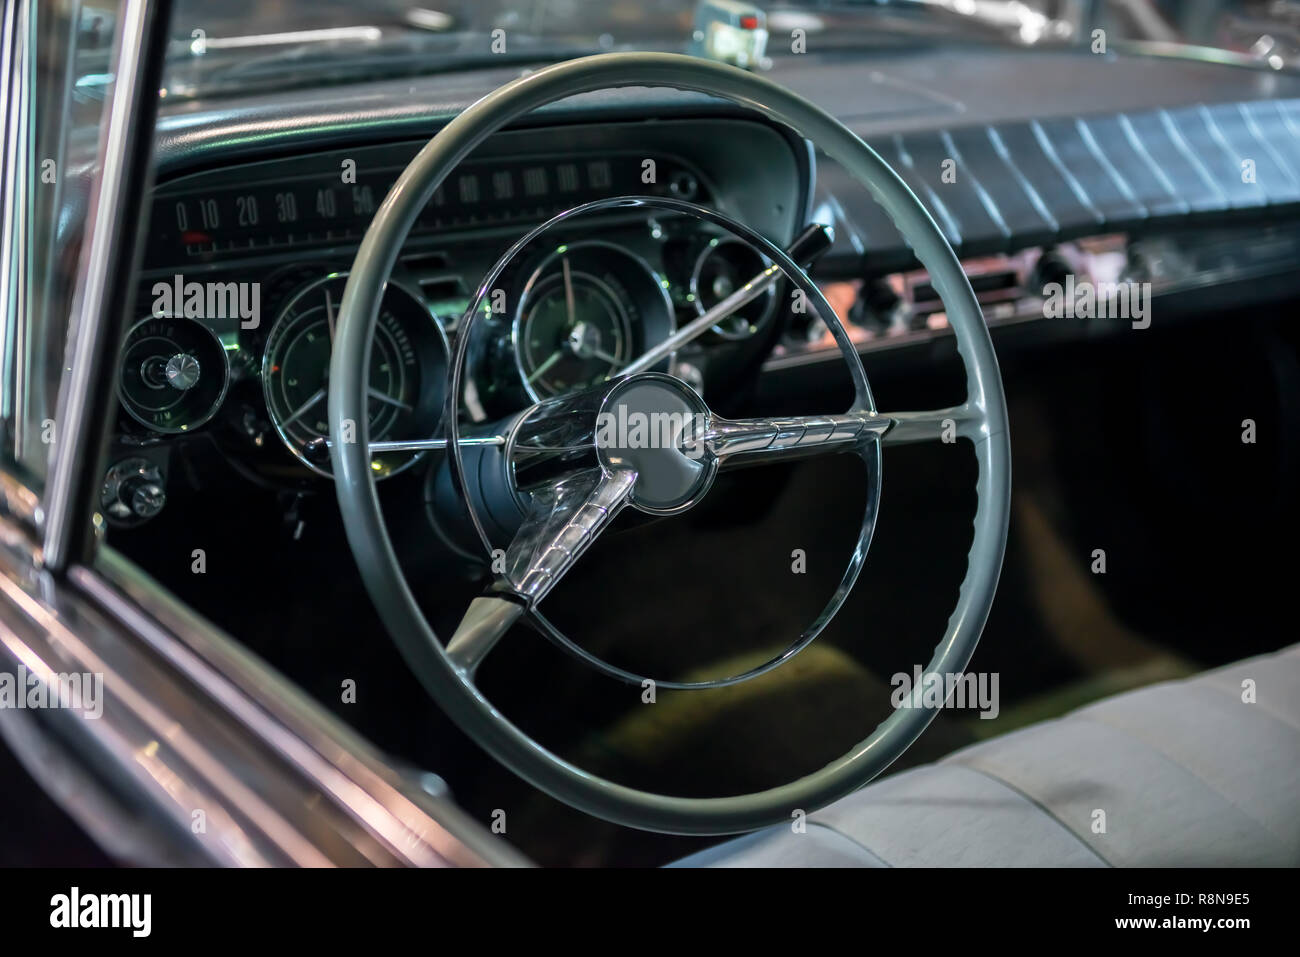 Dashboard With Steering Wheel Of A Classic Car From The